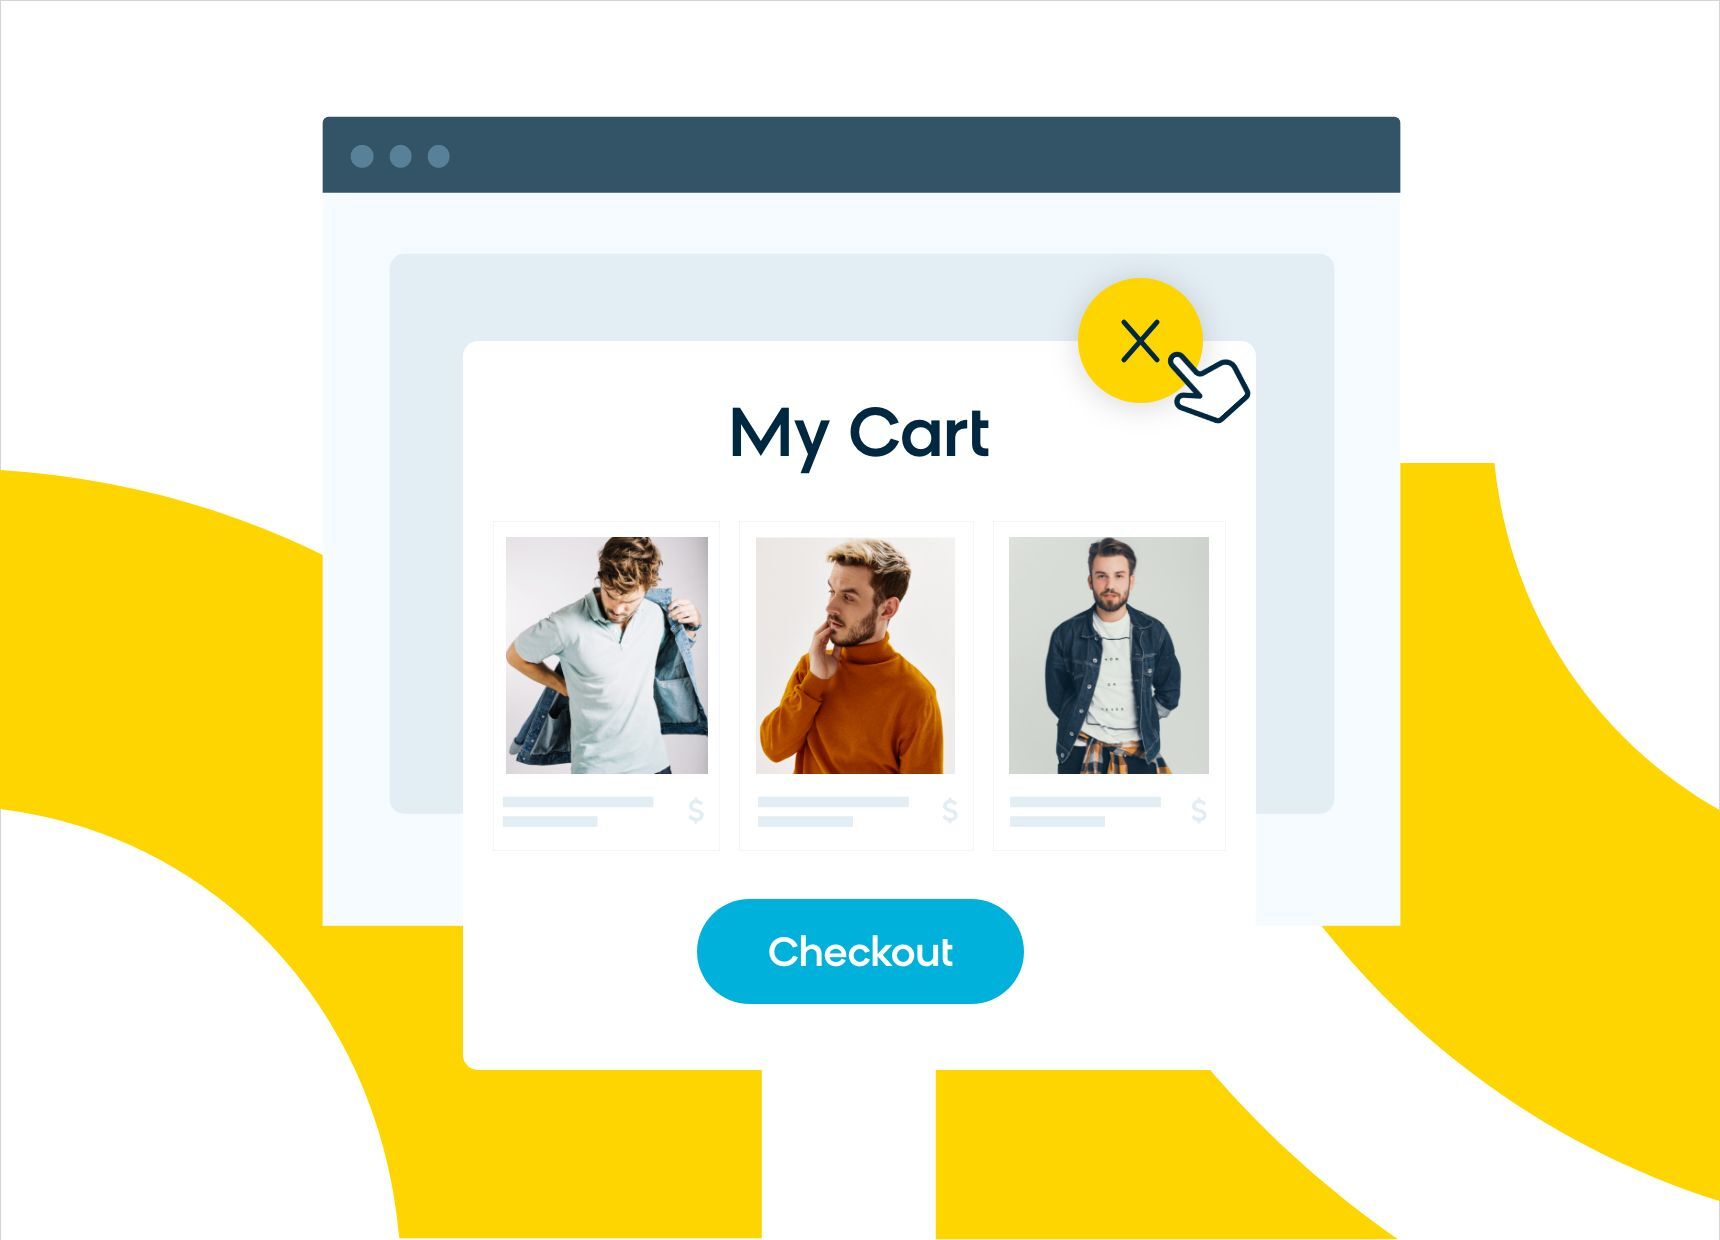 Example of an abandoned cart in e-commerce